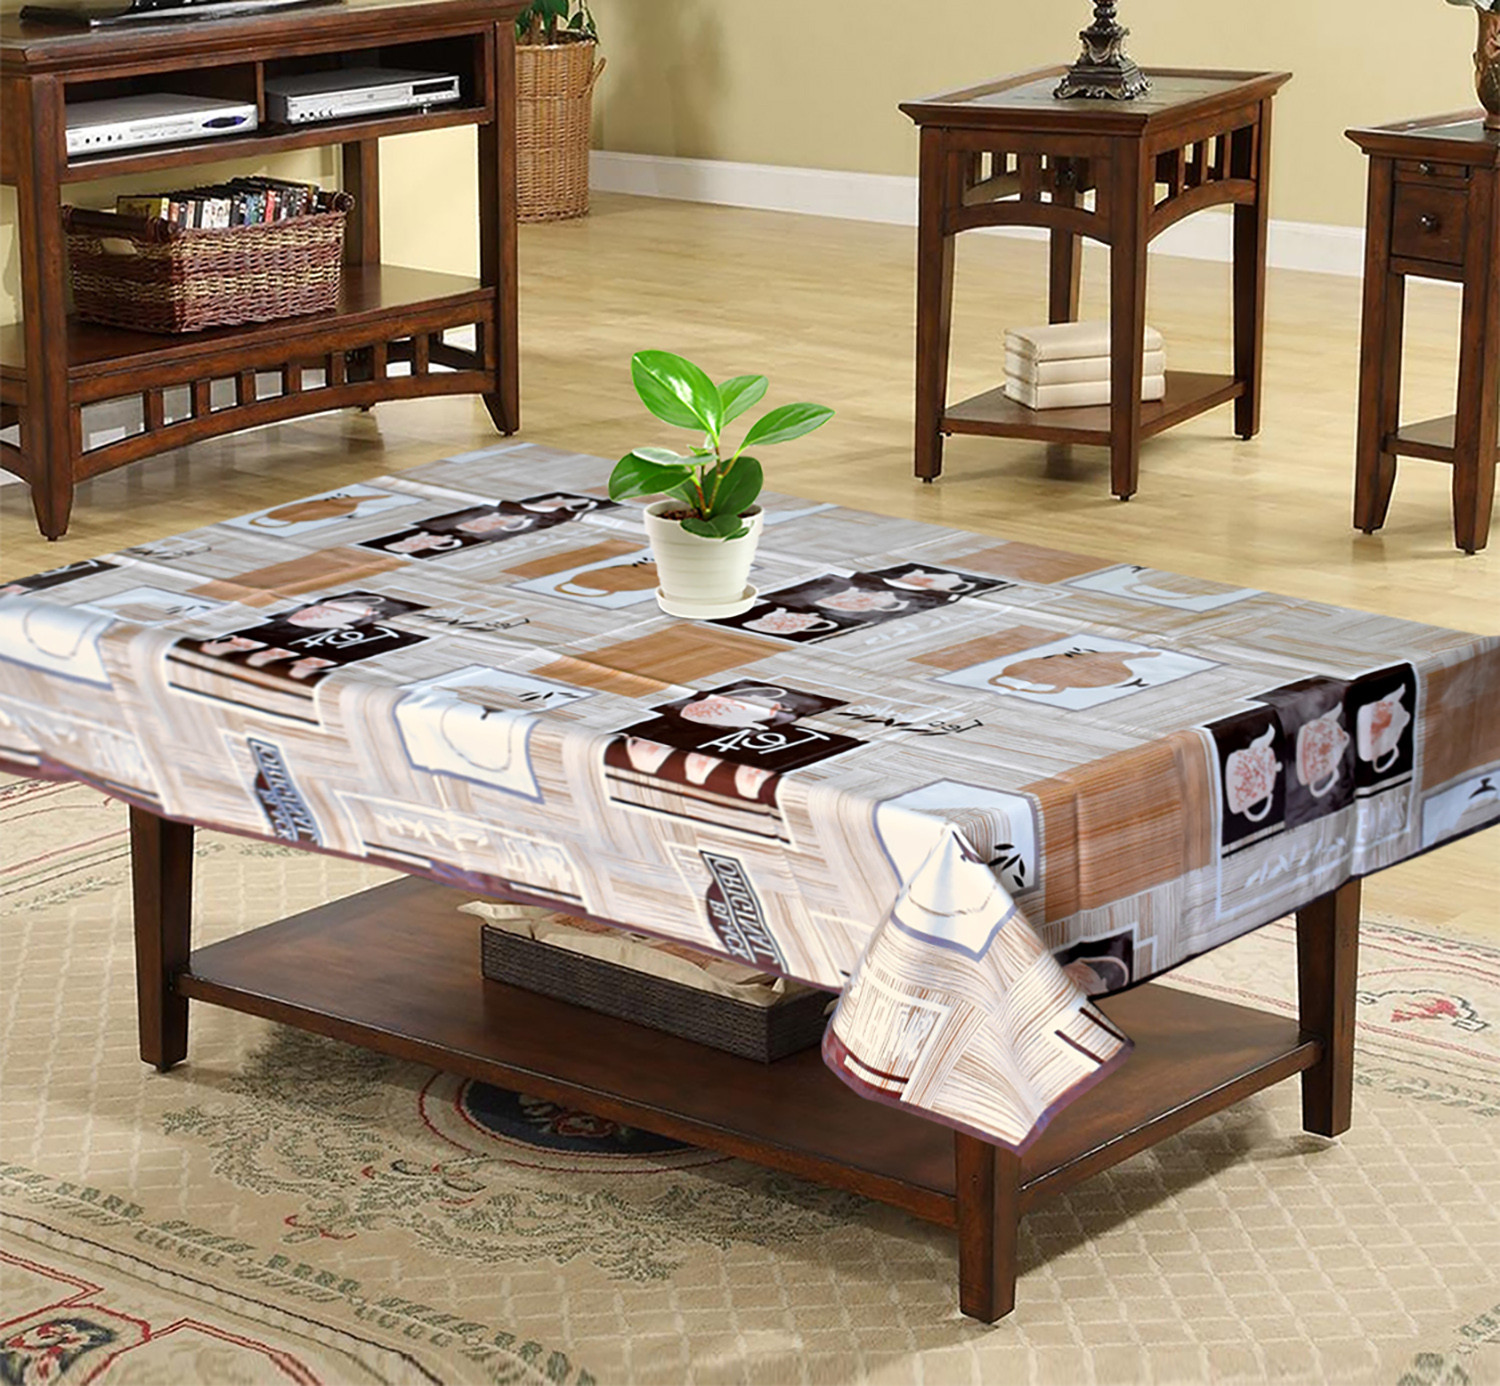 Kuber Industries Kettle Print PVC Center Table Cover/Table Cloth For Home Decorative Luxurious 4 Seater, 60